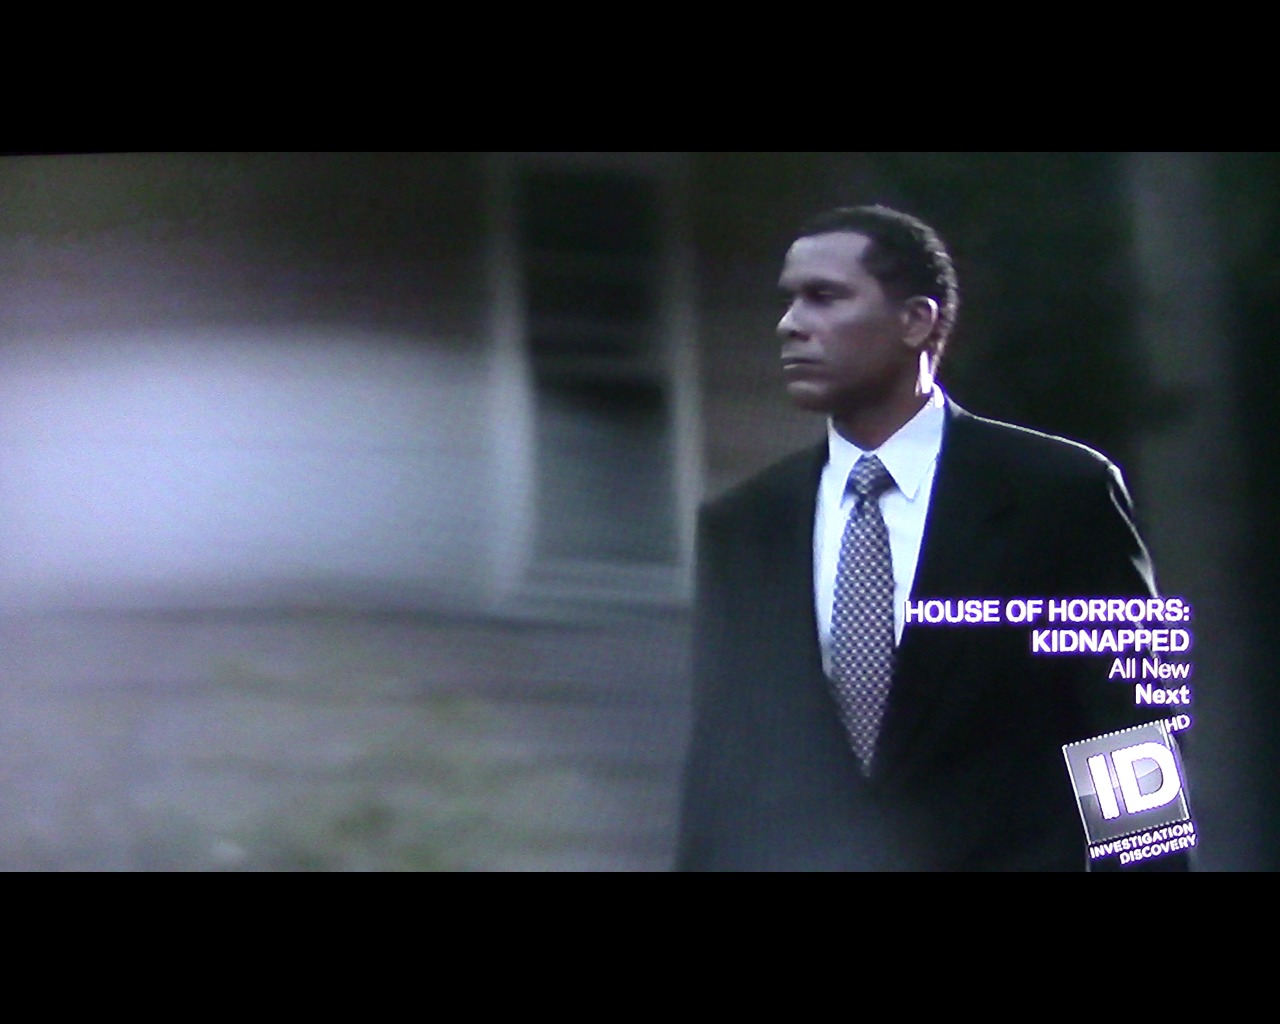 Playing a Detective on Investigation Discovery Series - House of Horrors: Kidnapped!